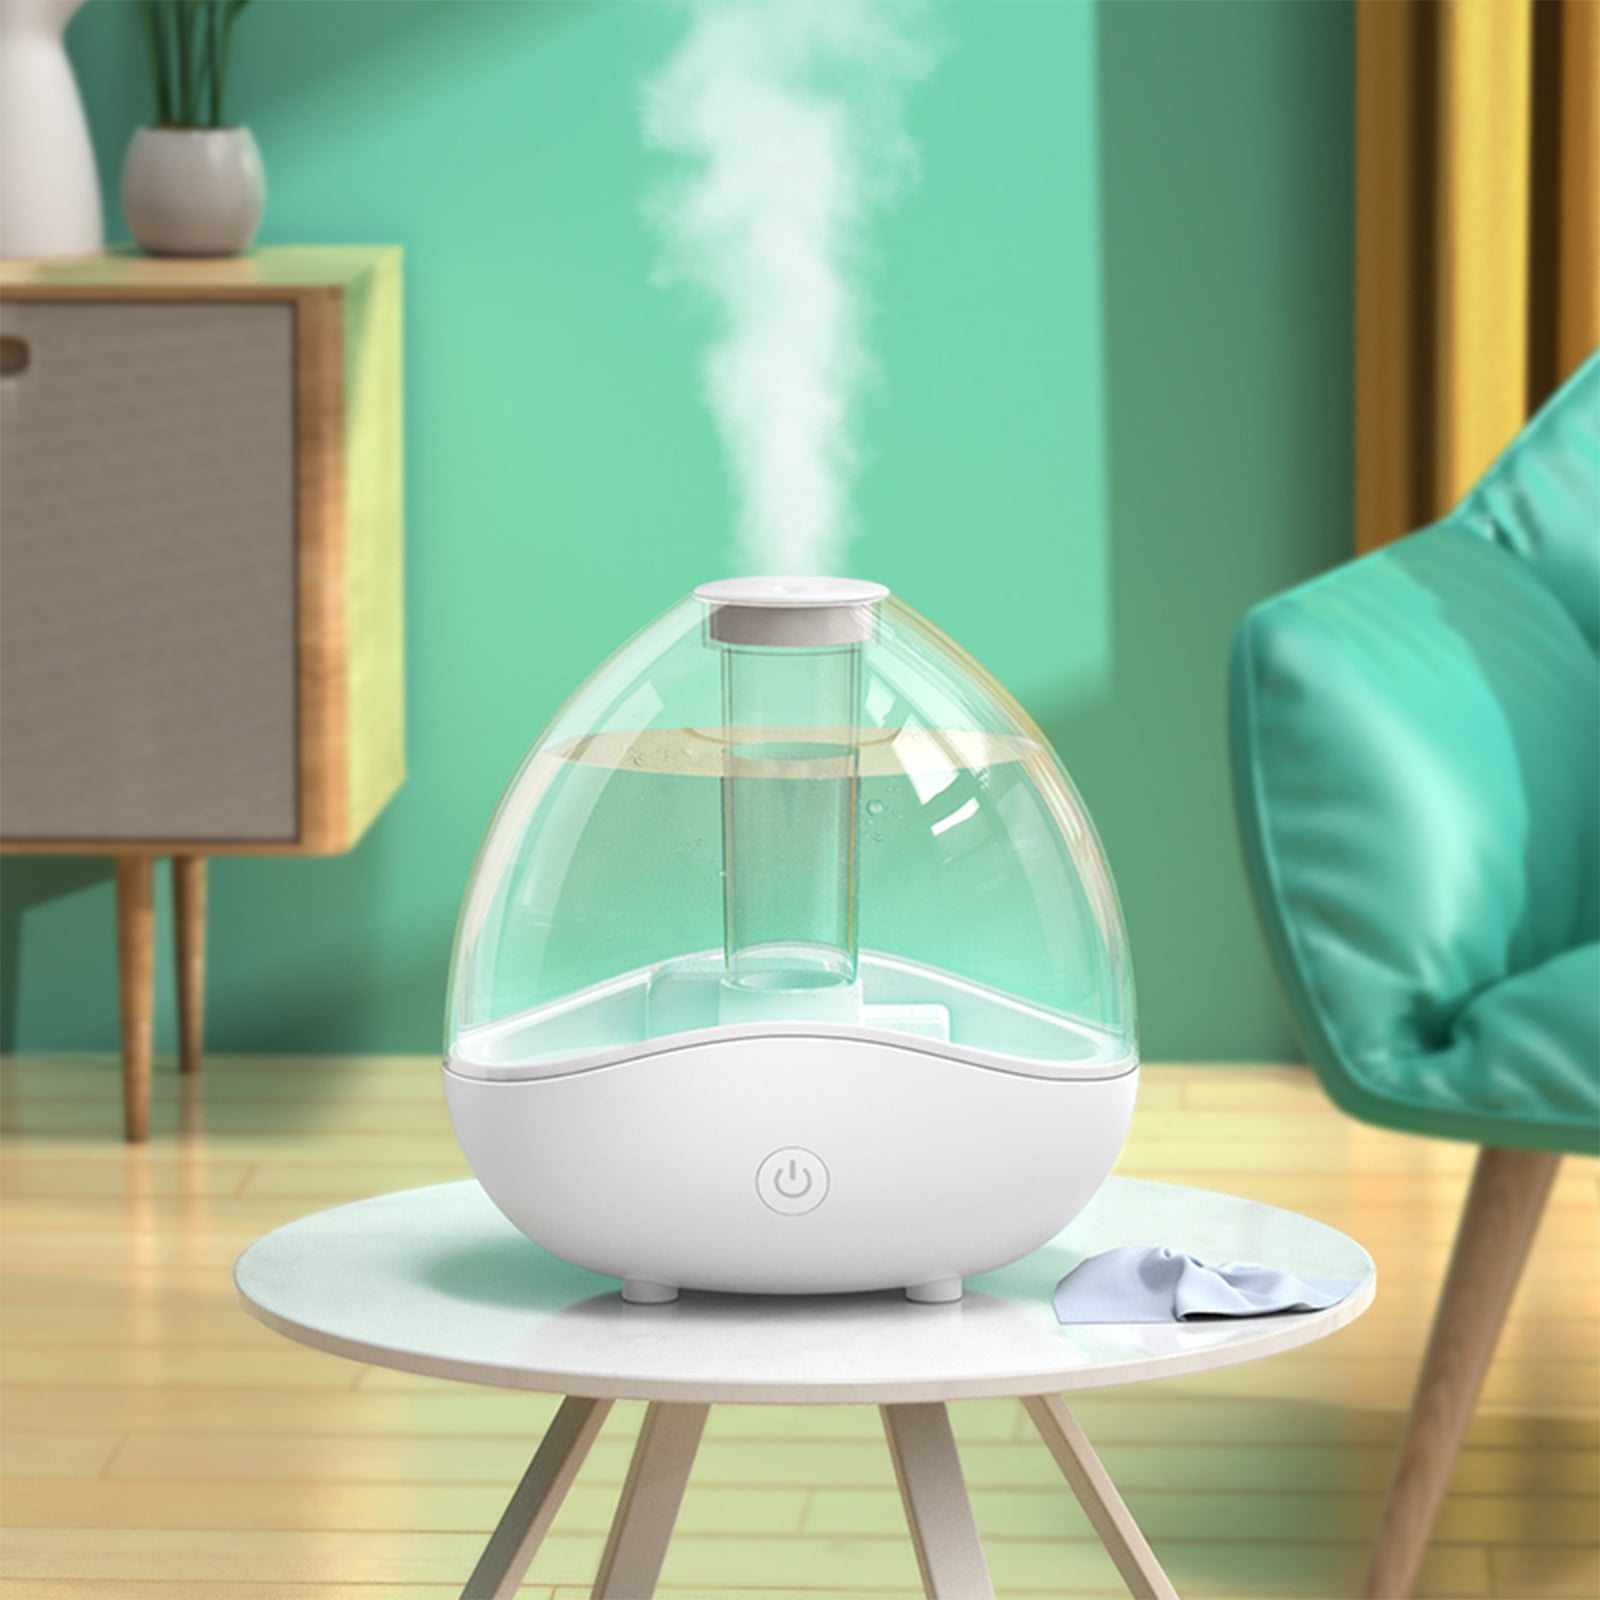 Cool Mist, Steam, & Digital Humidifiers at Ace Hardware